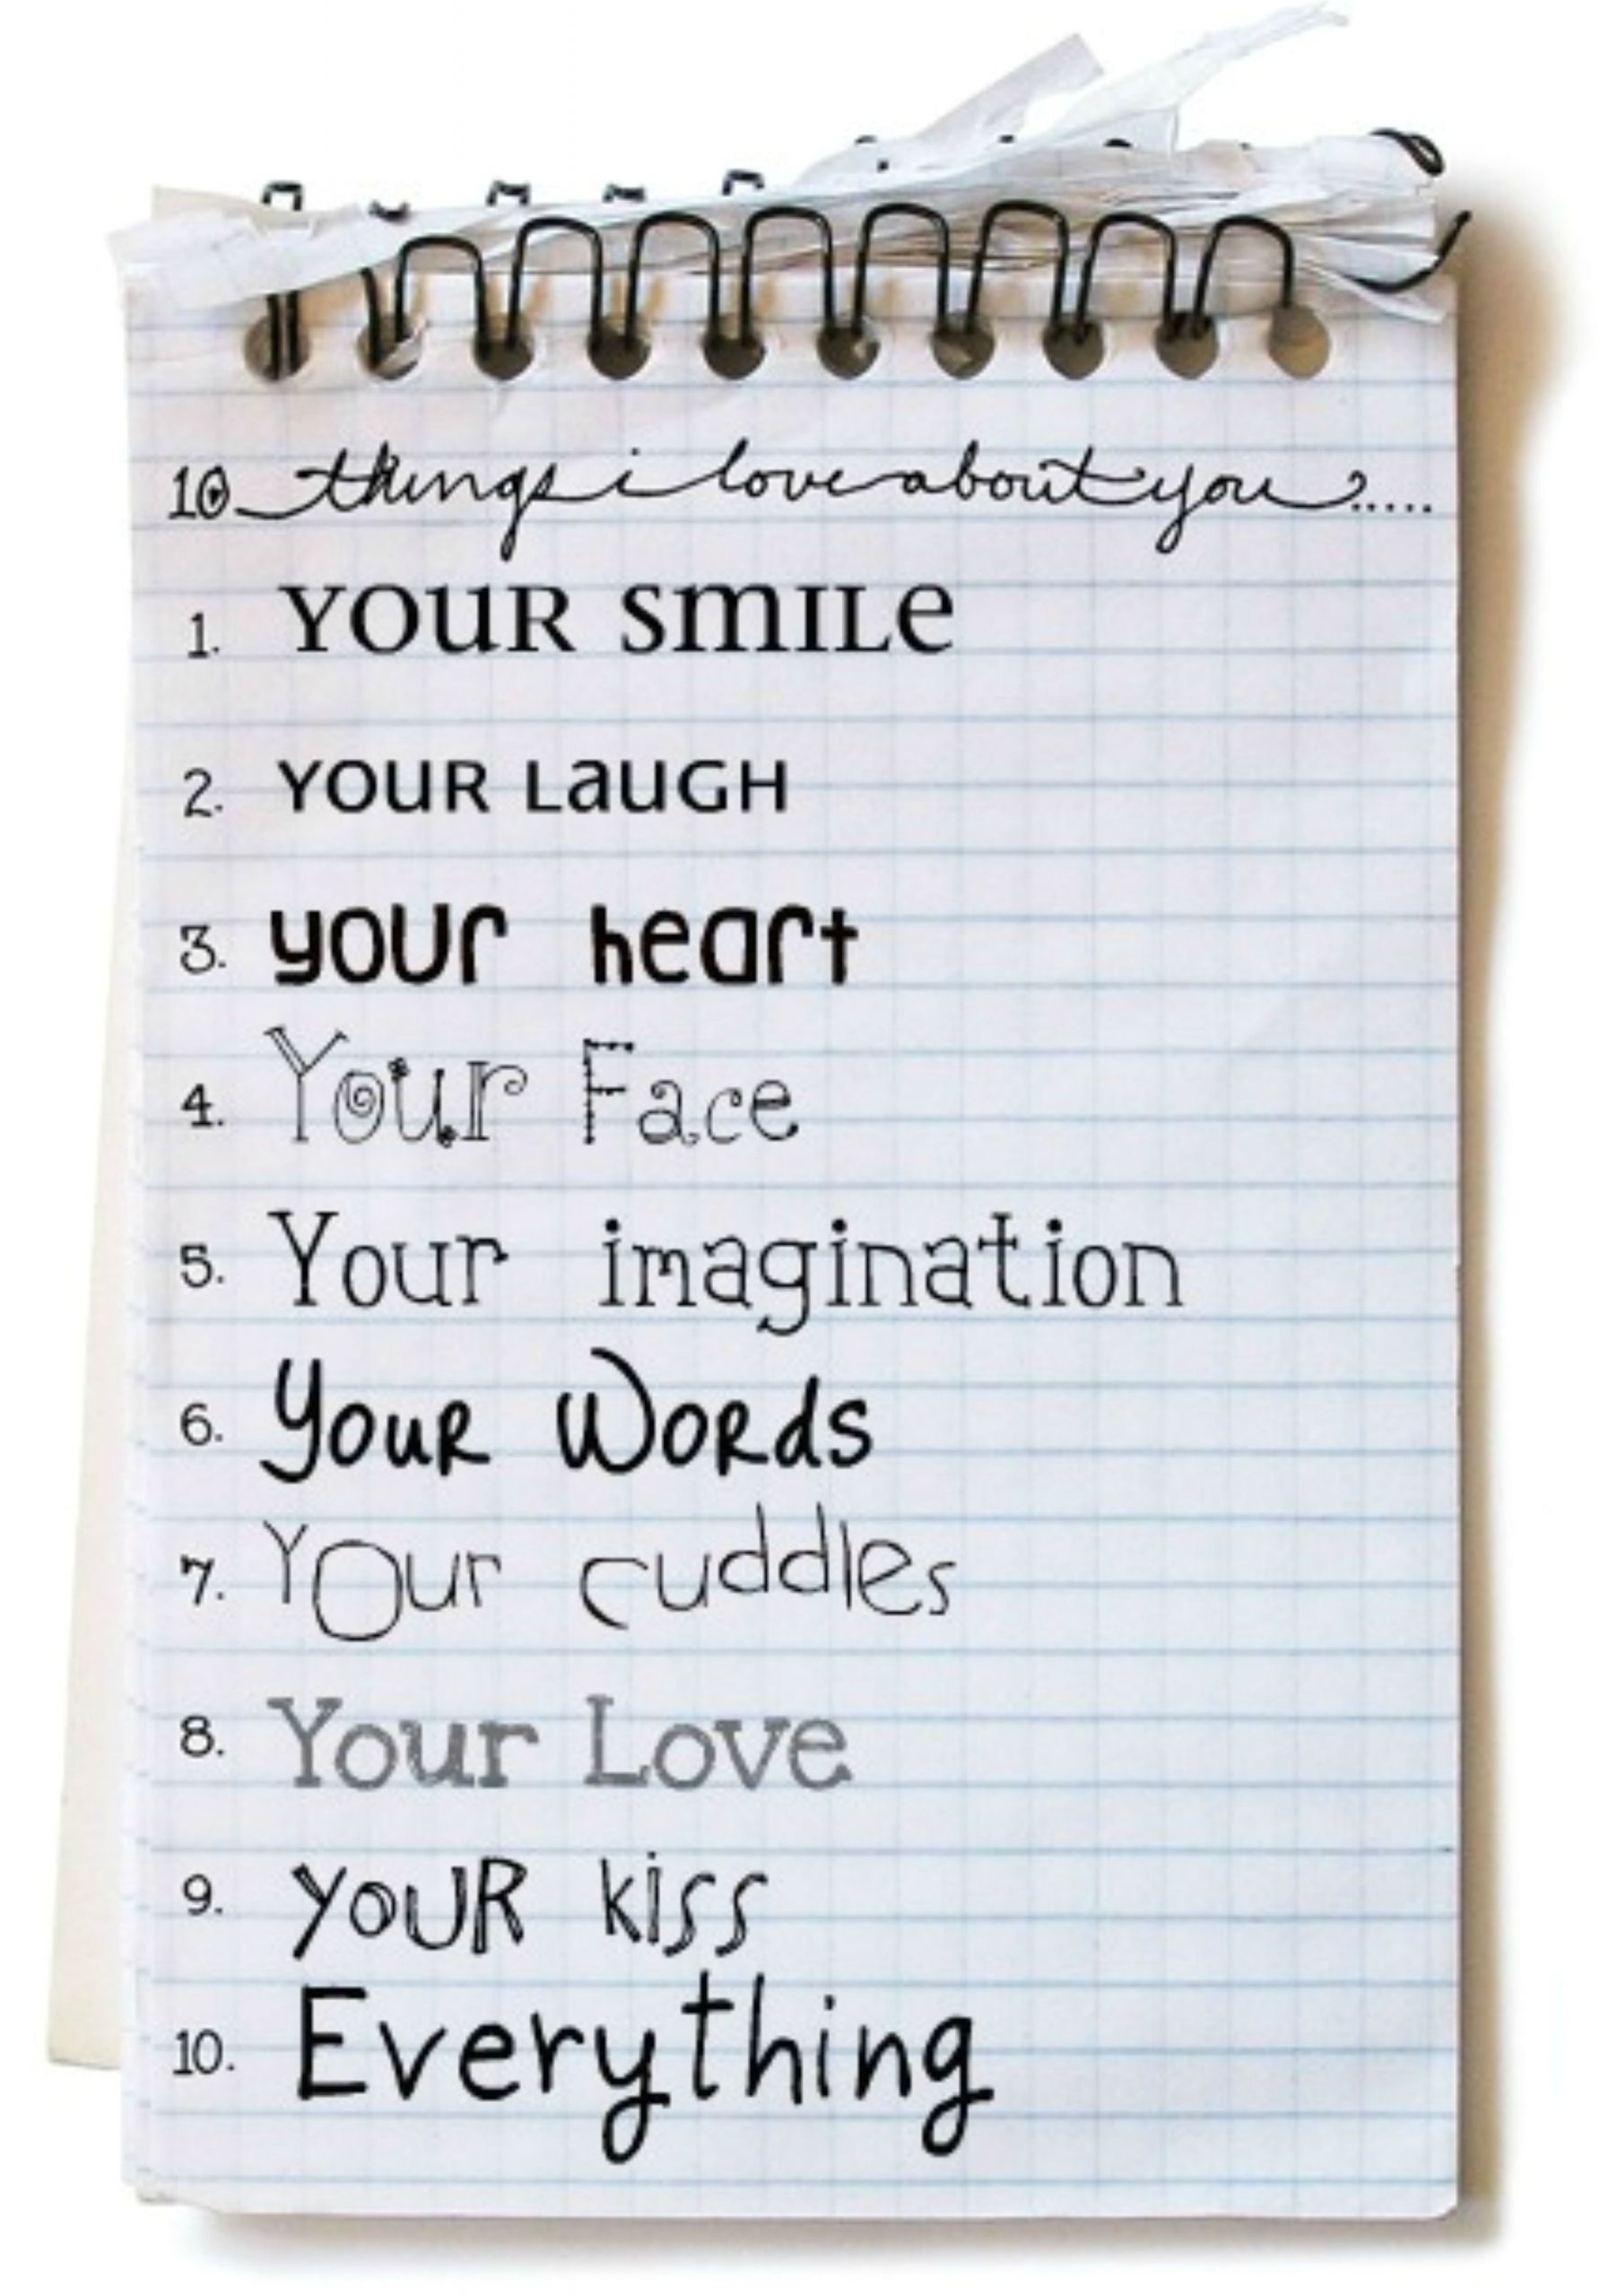 Love Quotes to Put In A Card 10 Things I Love About You with Images Cards for